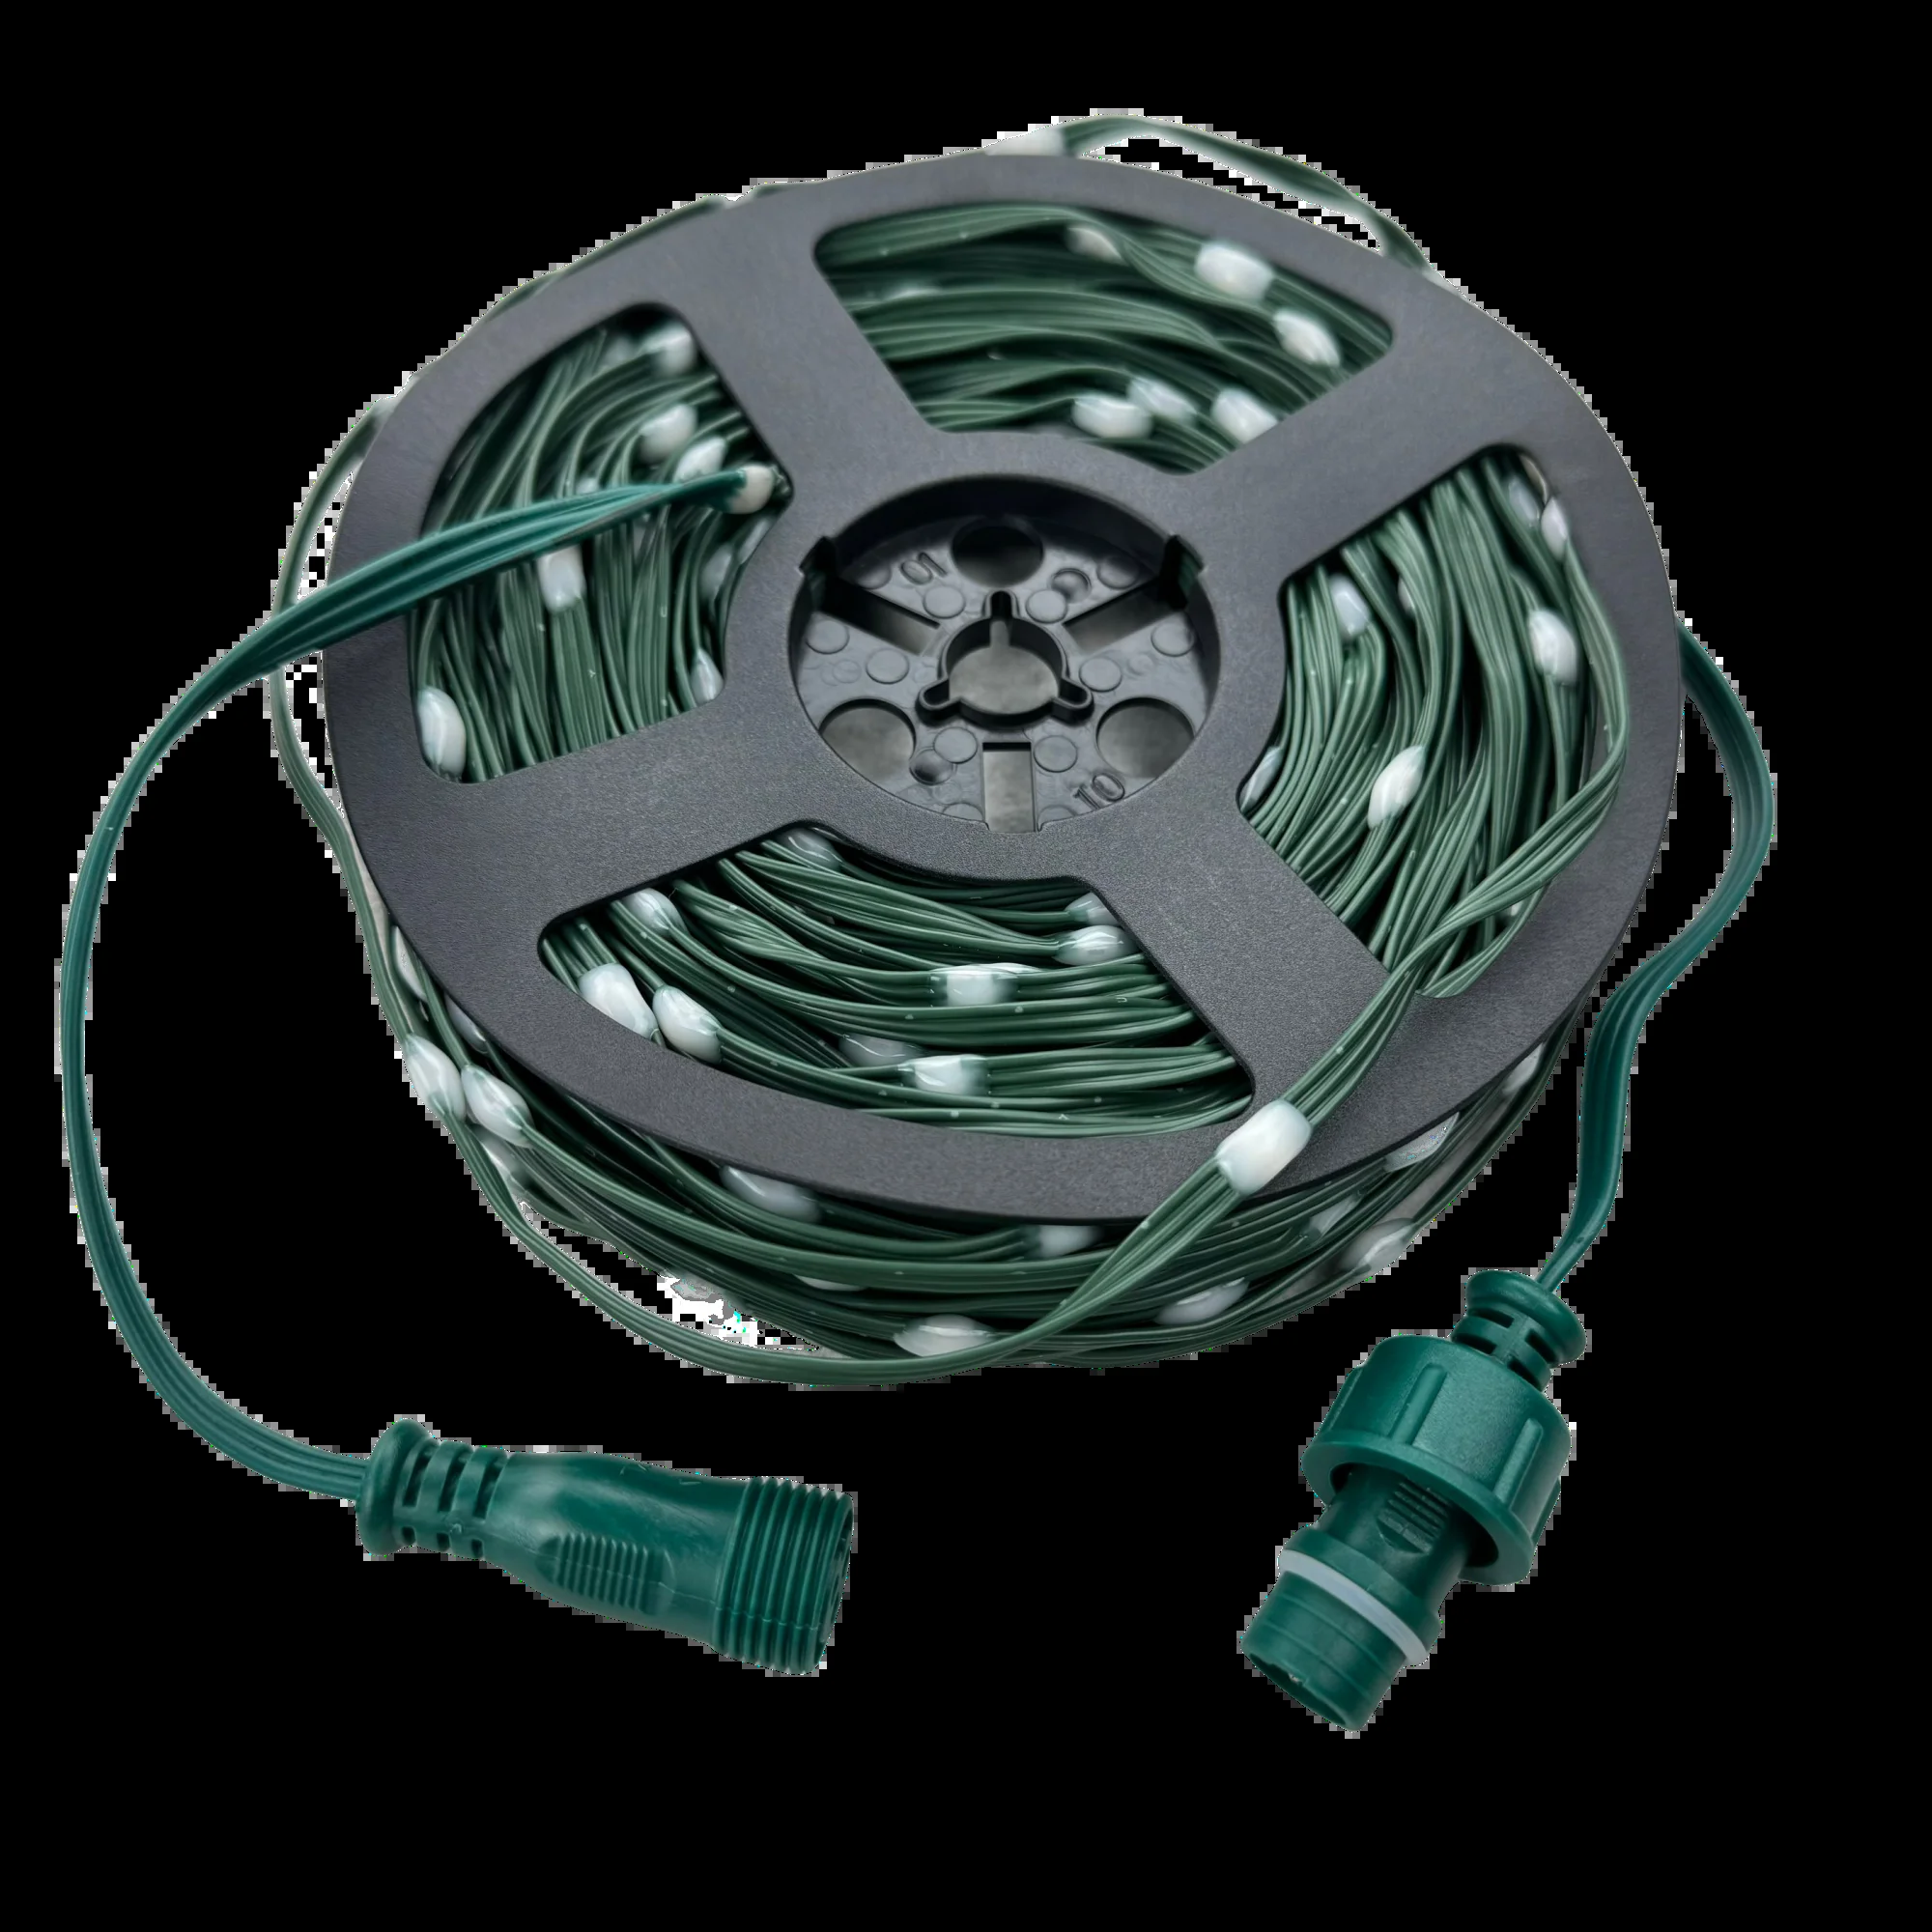 ׸ ̾ Ű ,  LED ȼ Ʈ Ʈ, RGB ּ   IP67, DC12V, 20AWG, 5cm, 10cm ġ, 50ct, 100ct, 200ct, WS2811